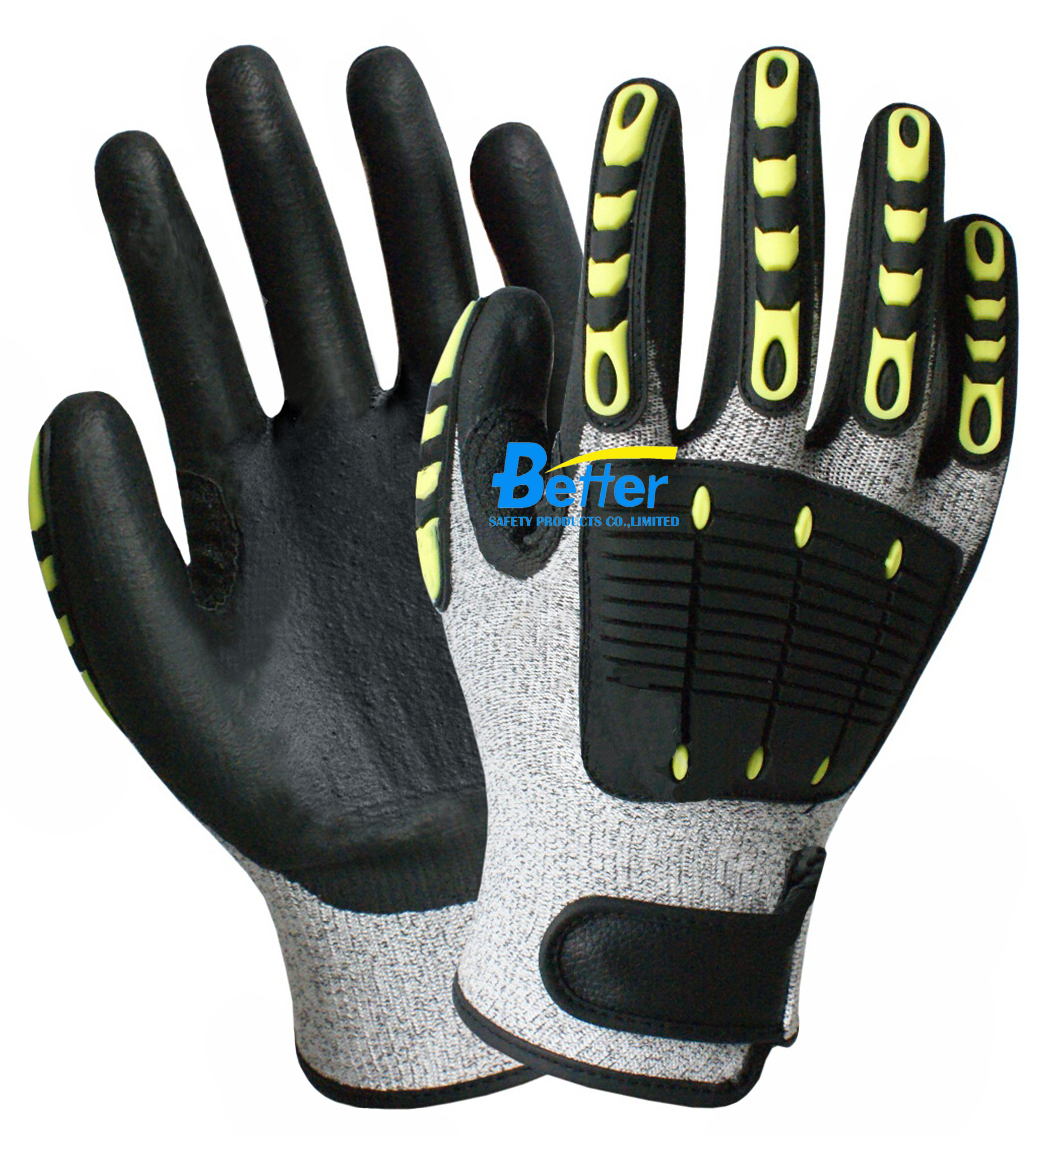 BGAV005-Cut-Resistant Rubber Palm Impact Resistant And Anti-Vibration Gloves